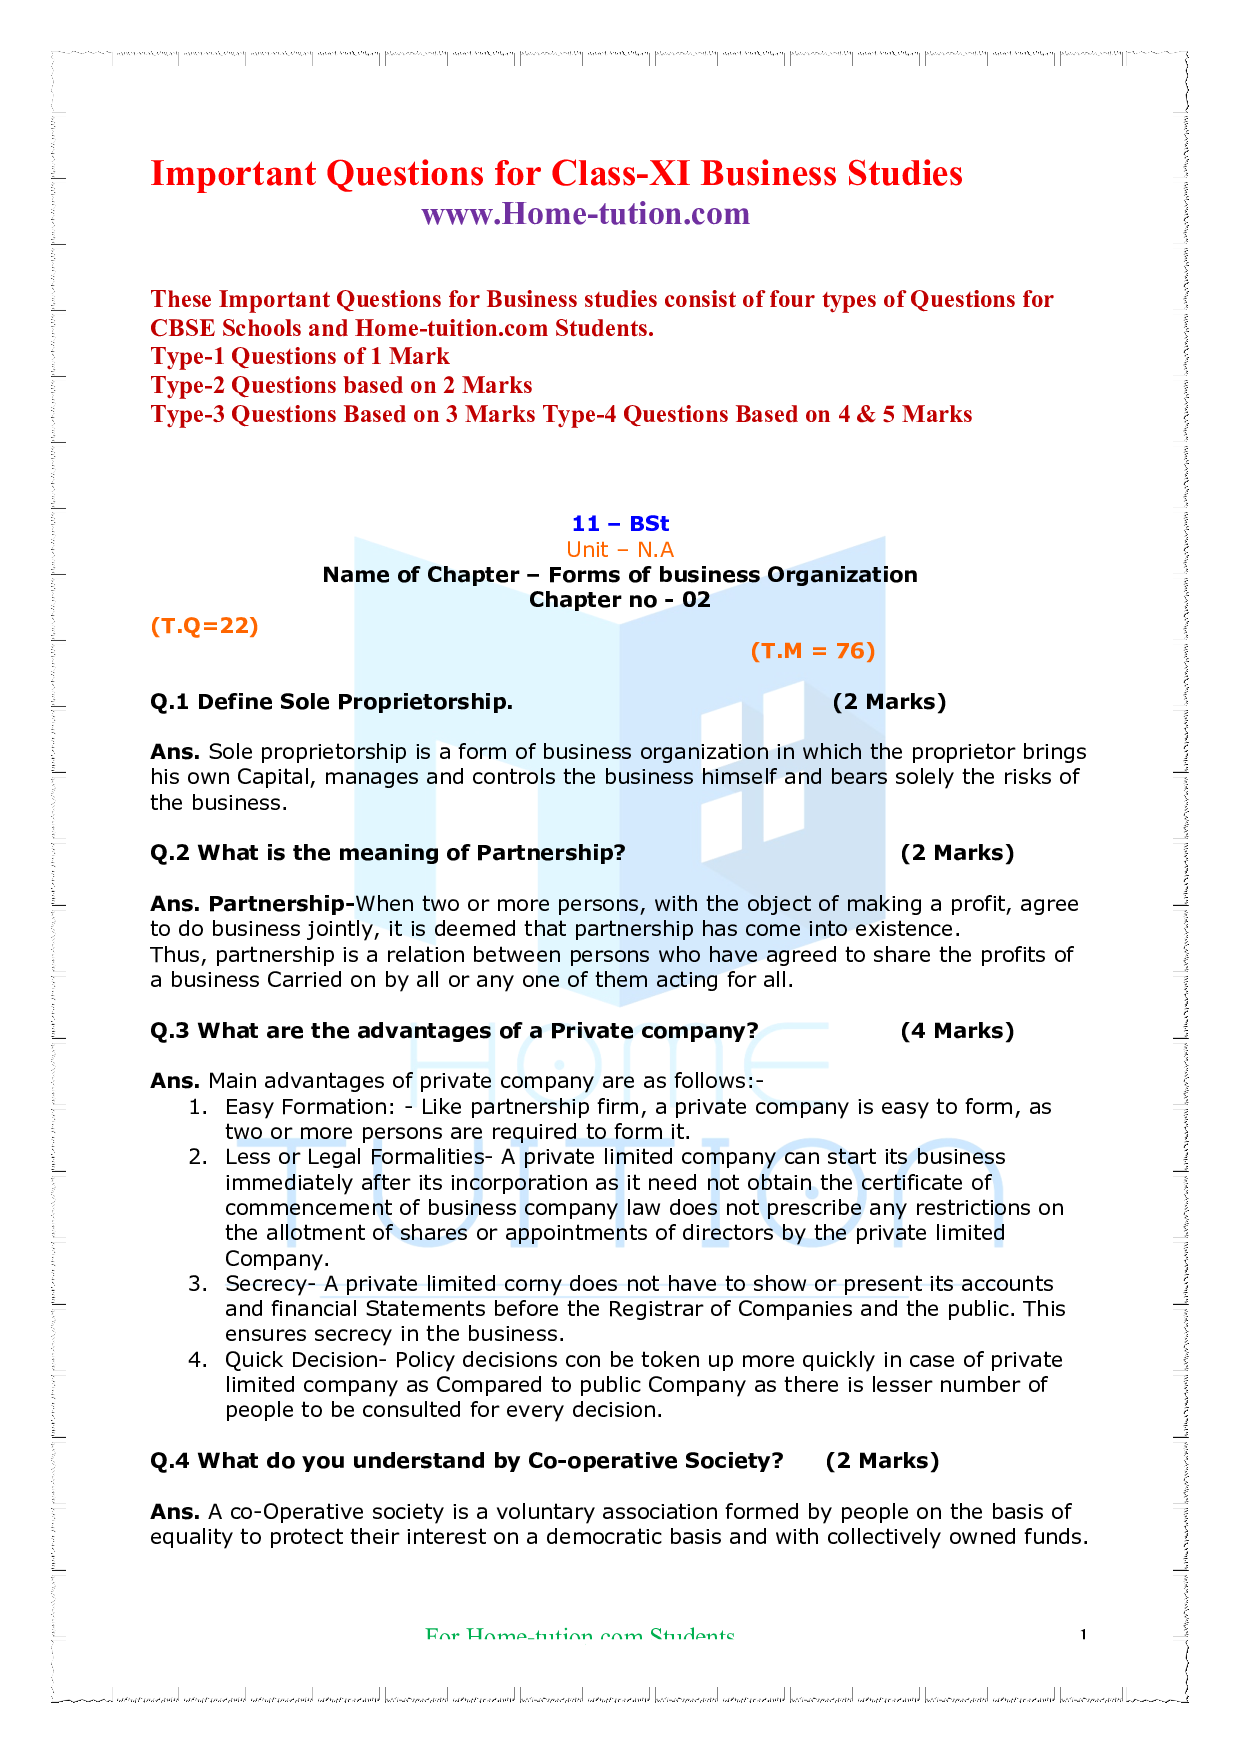 case study questions on forms of business organisation class 11